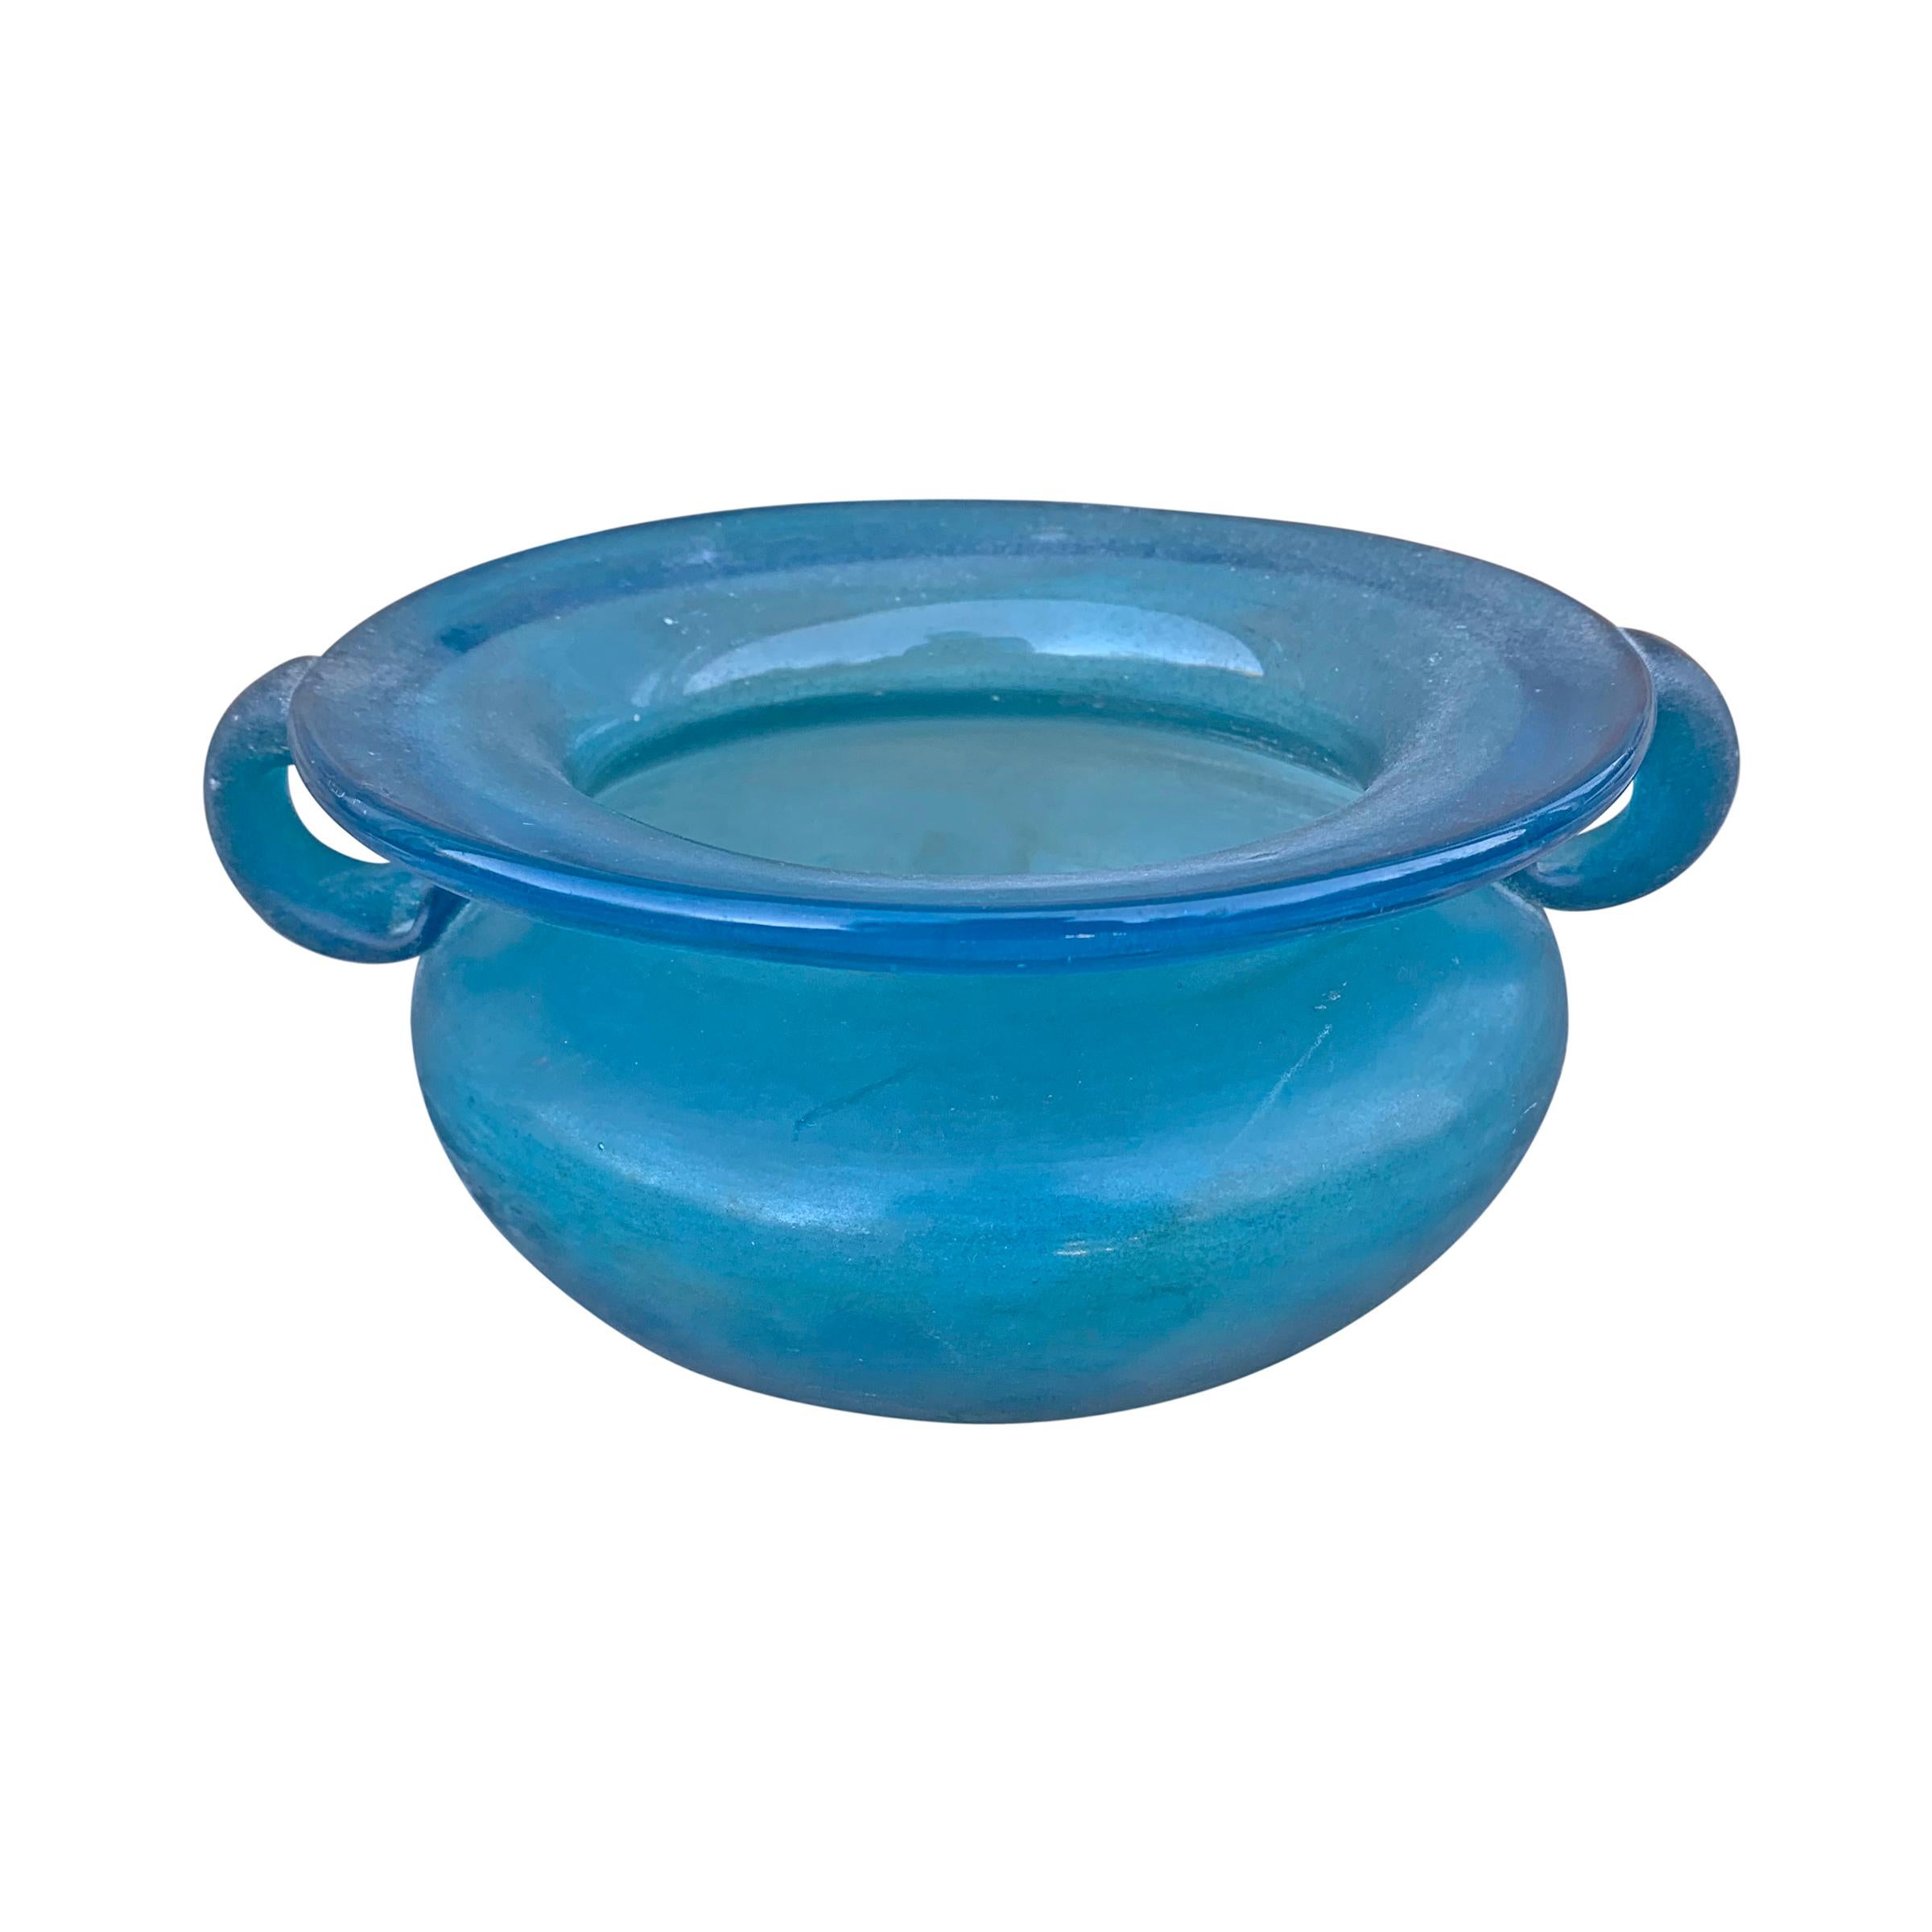 A wonderful mid-20th century Italian Murano blue scavo glass bowl with an ovoid form and two handles. 